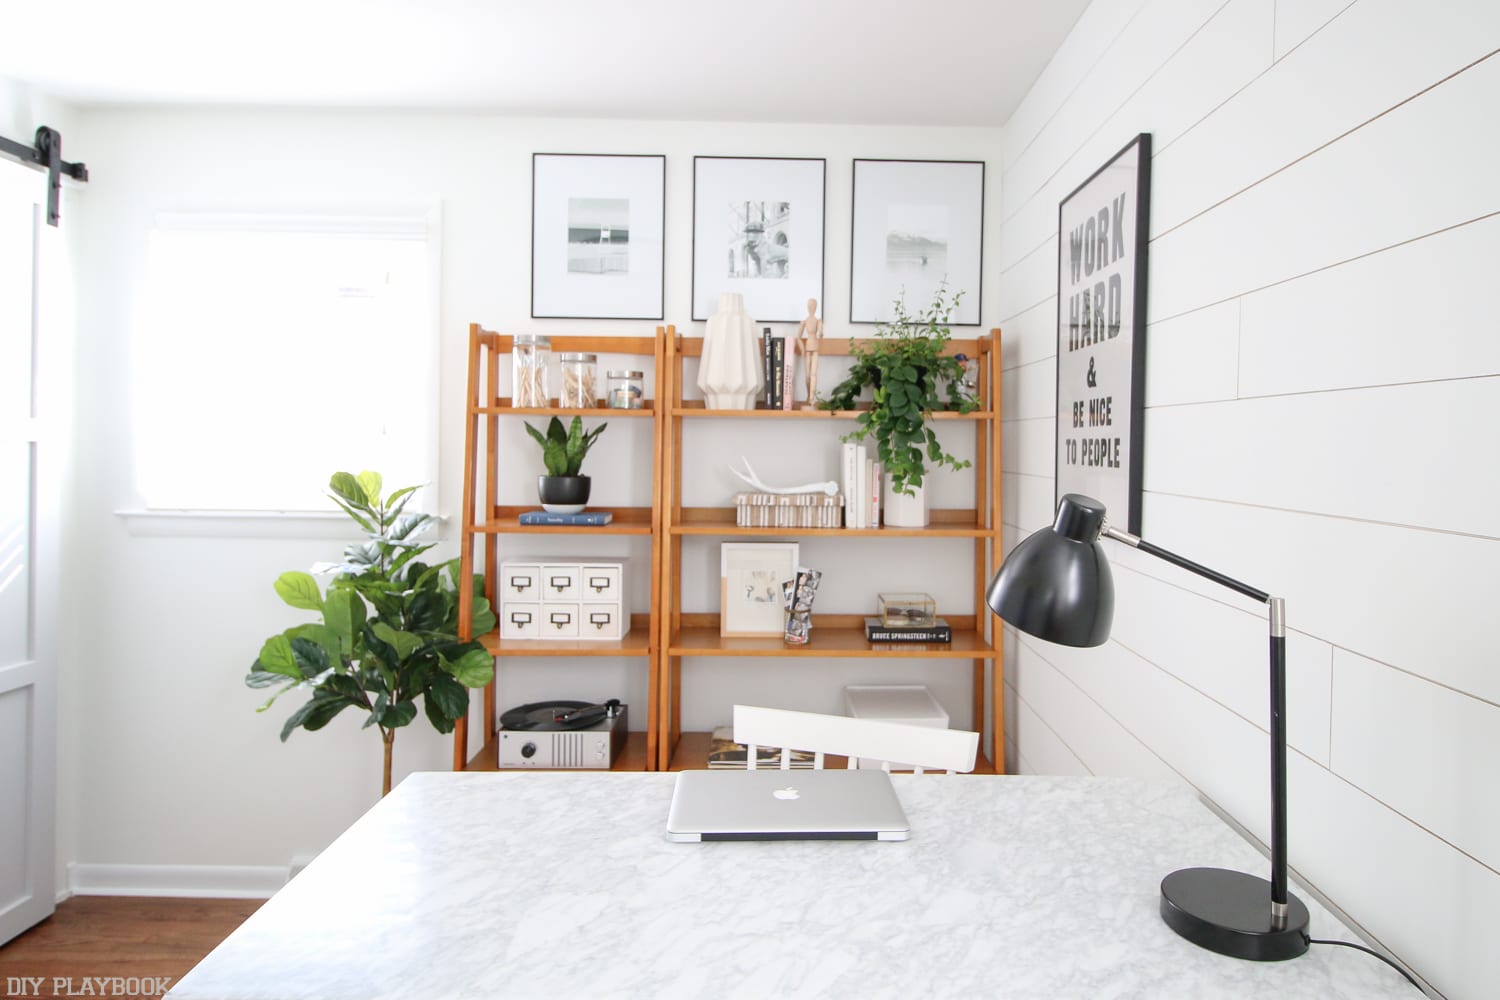 Home office- neat, tidy and accented with plants